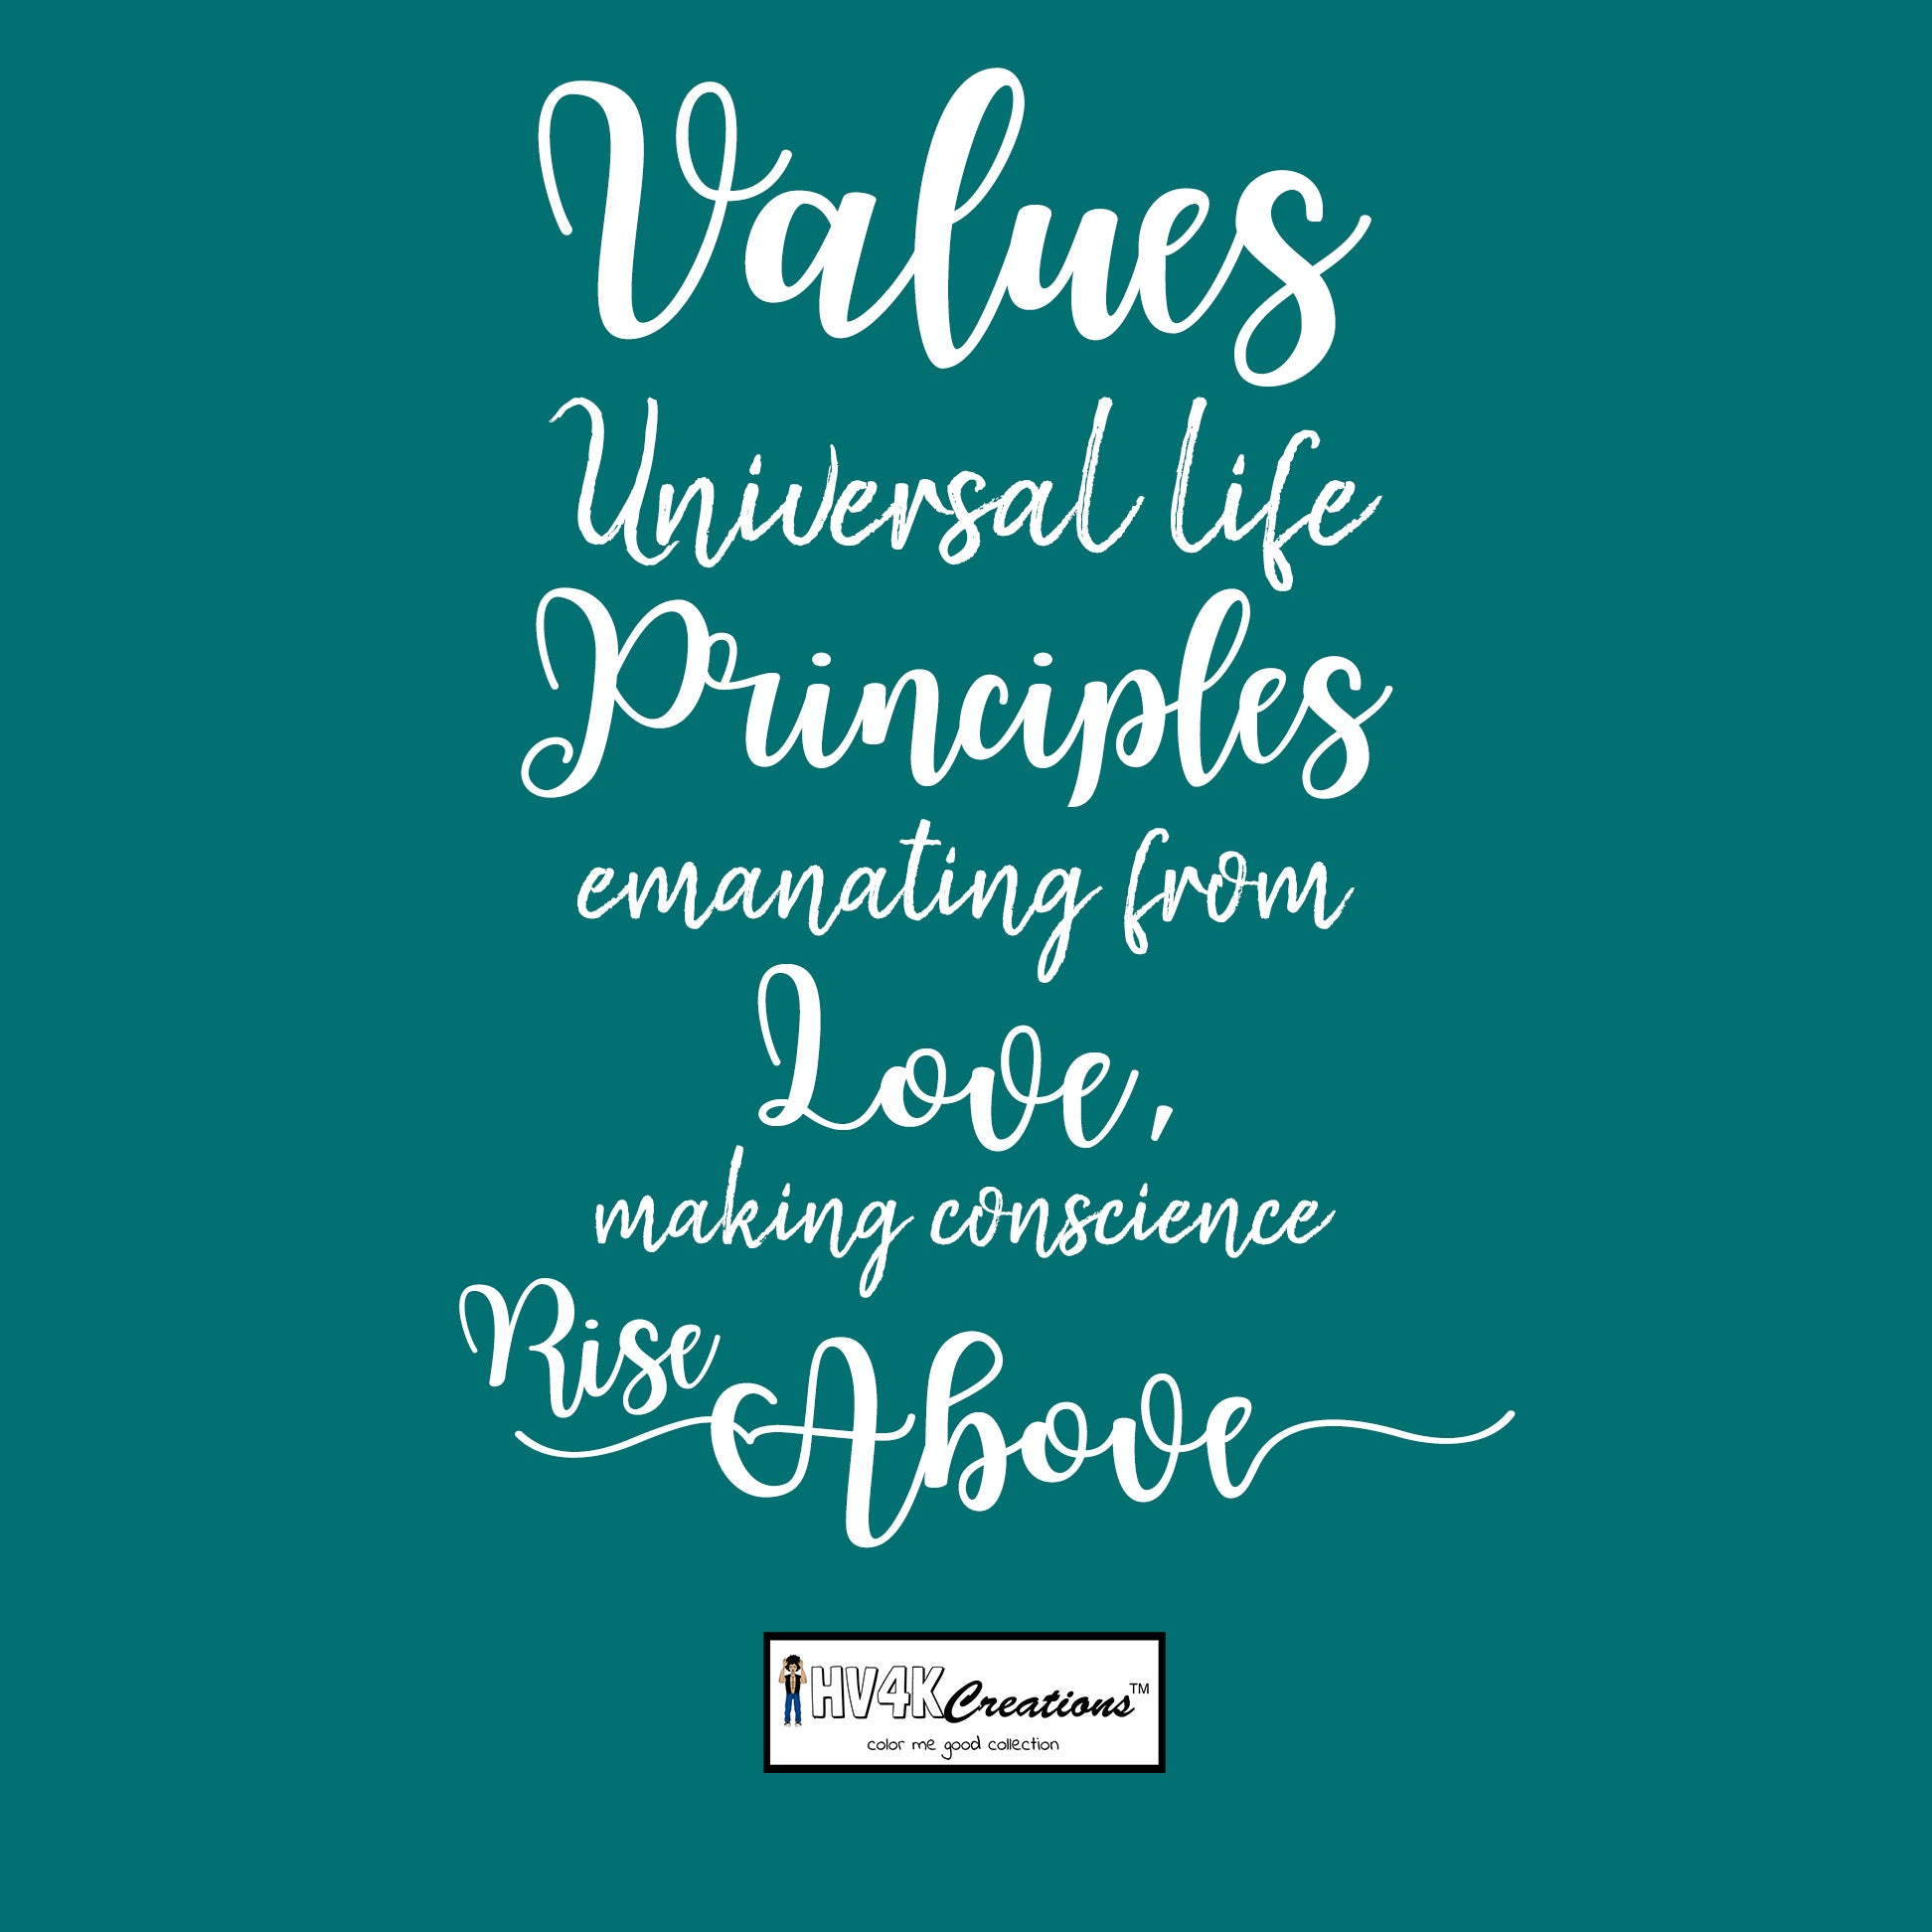 values rhyme picture